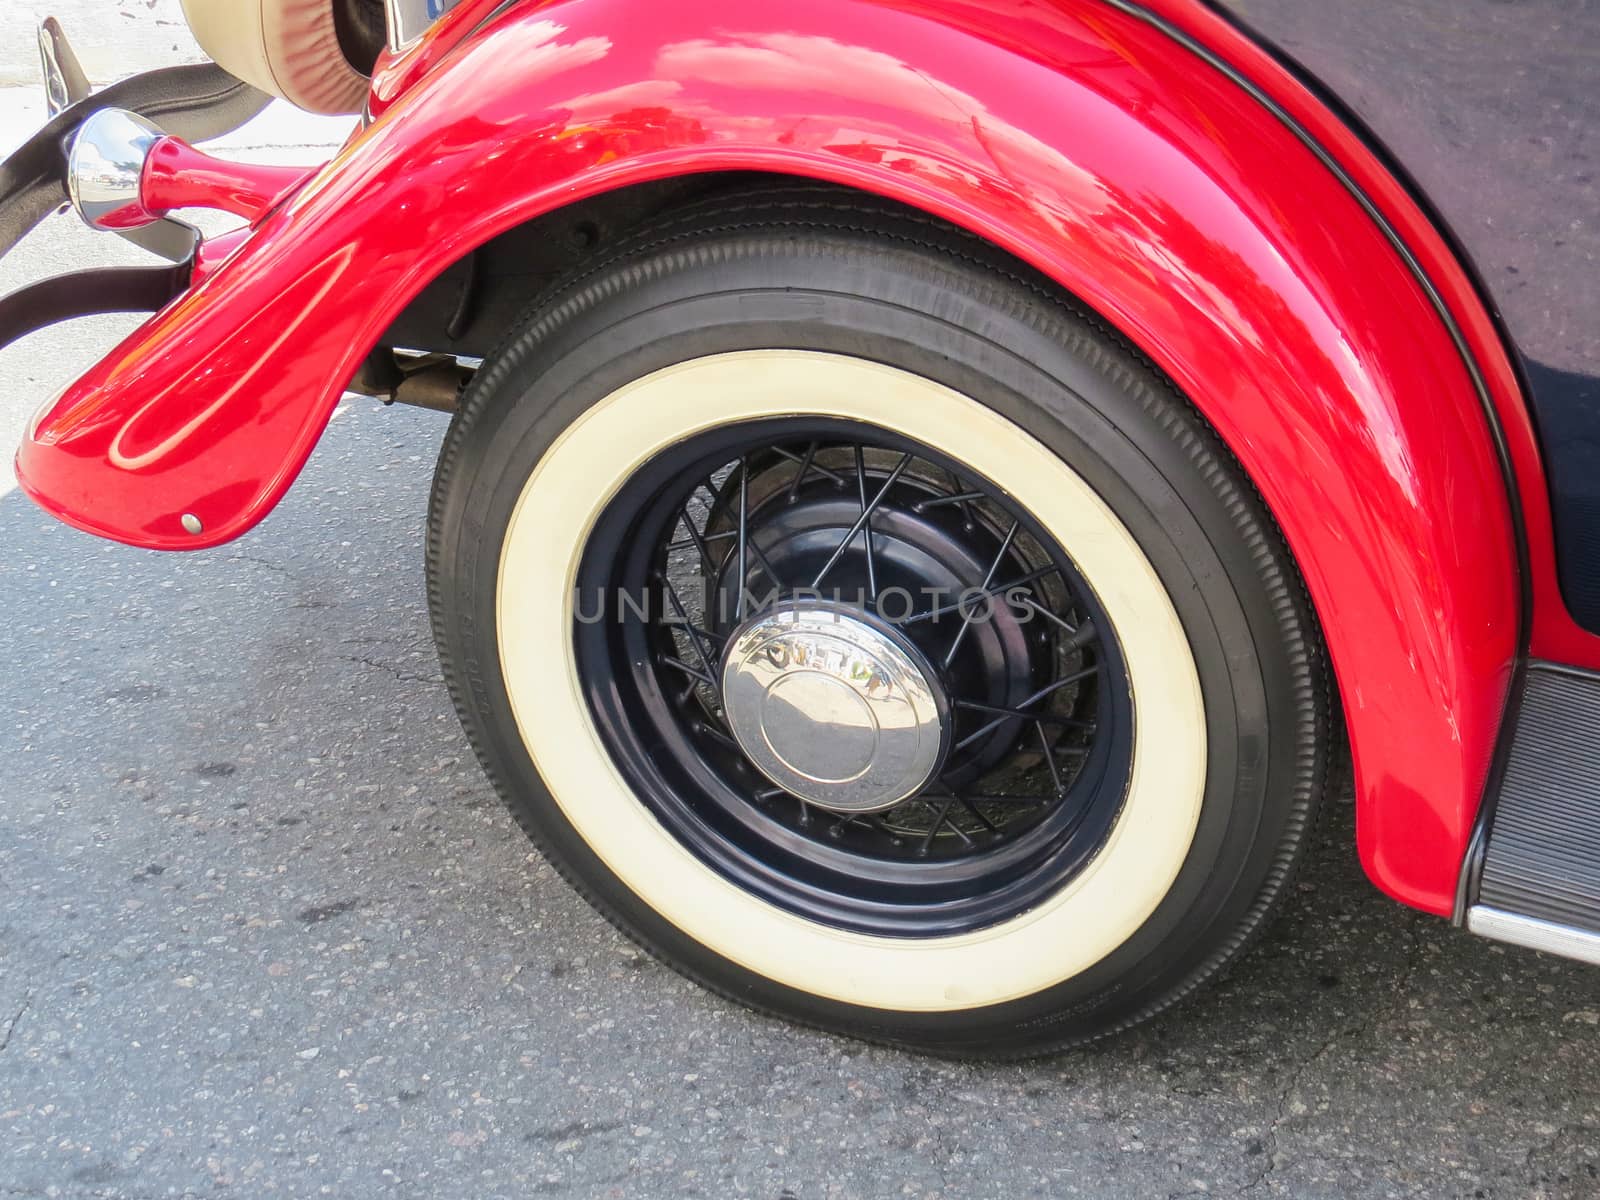 Classic old car, wheel and  red fender. by silviopl